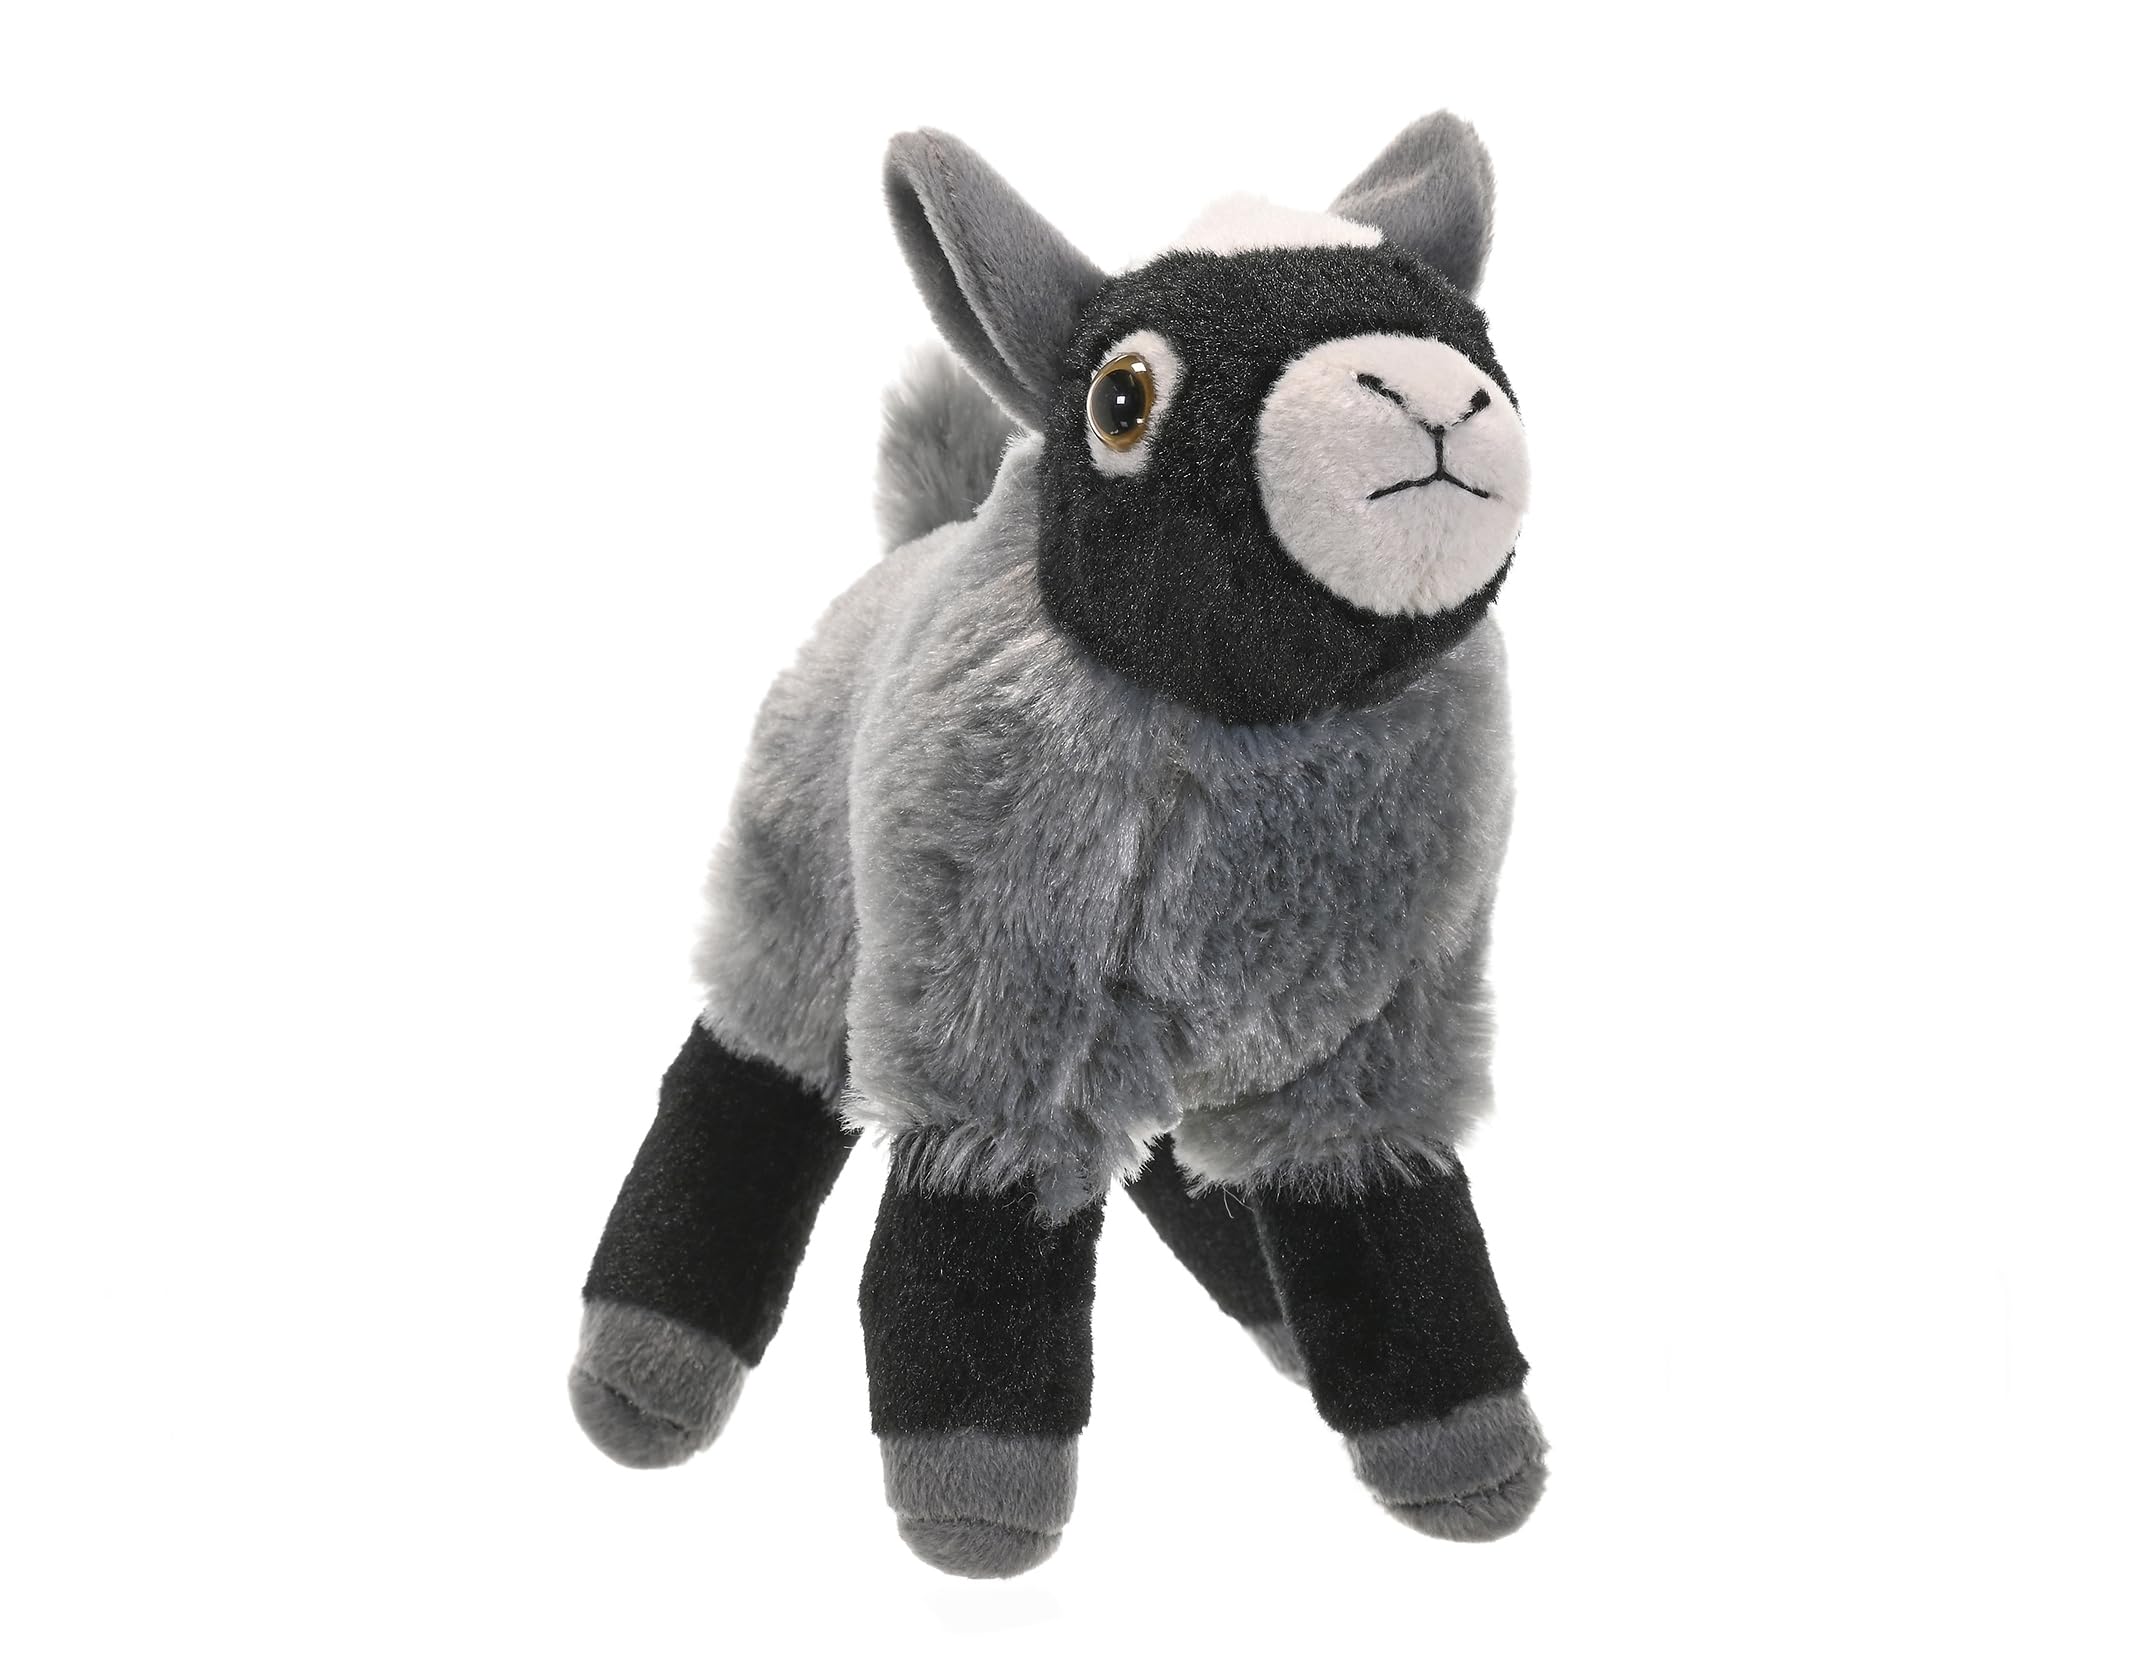 8" Wild Republic Goat Plush $6.73 + Free Shipping w/ Prime or on orders over $35